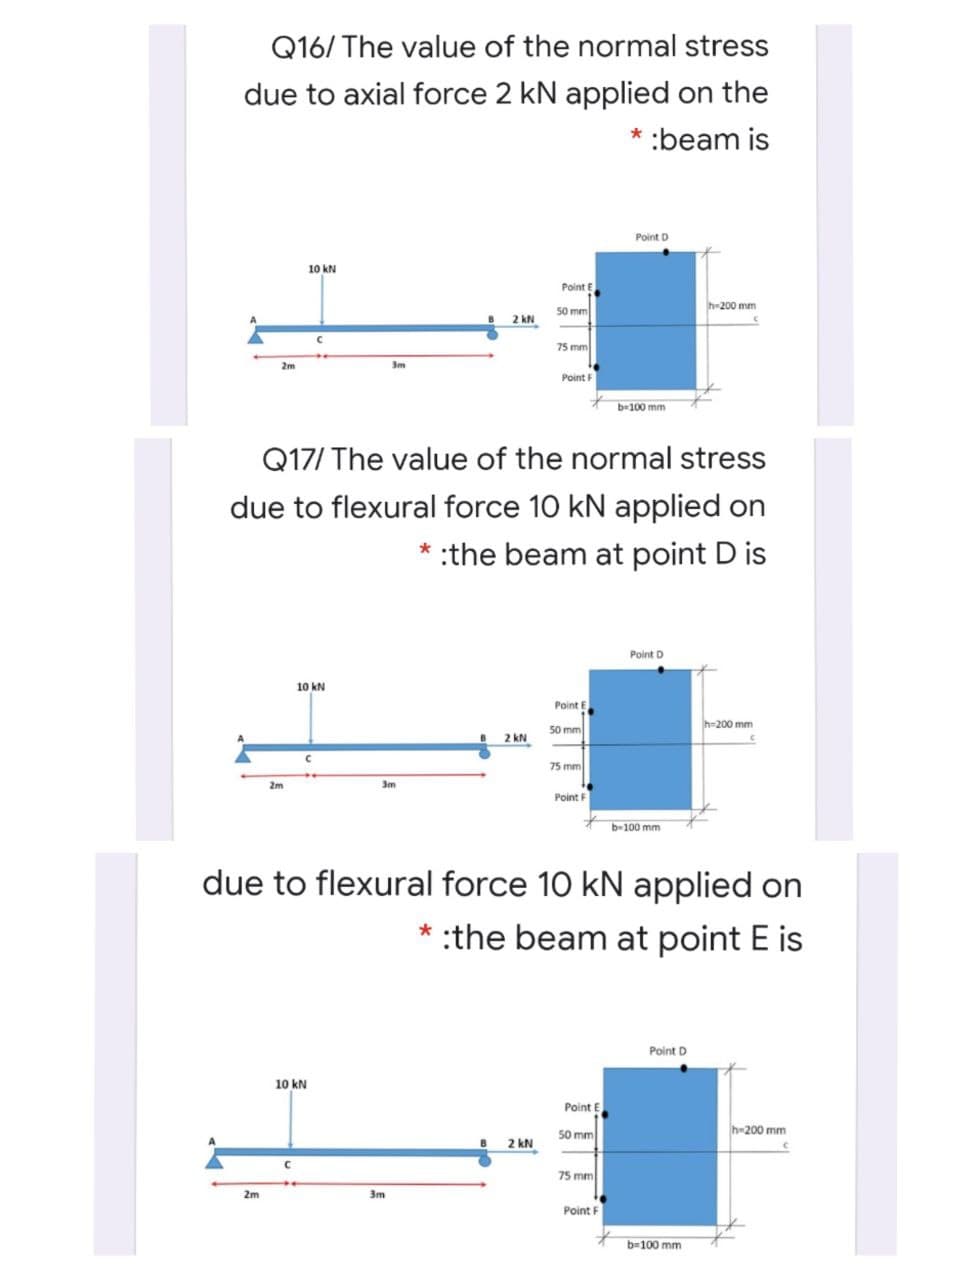 Q16/ The value of the normal stress
due to axial force 2 kN applied on the
* :beam is
Point D
10 kN
Point E
50 mm
h-200 mm
2 kN
75 mm
2m
3m
Point F
b-100 mm
Q17/ The value of the normal stress
due to flexural force 10 kN applied on
* :the beam at point D is
Point D
10 kN
Point E
50 mm
h-200 mm
2 kN
75 mm
2m
3m
Point F
b-100 mm
due to flexural force 10 kN applied on
* :the beam at point E is
Point D
10 kN
Point E
50 mm
2 kN
h-200 mm
75 mm
2m
3m
Point F
b-100 mm
